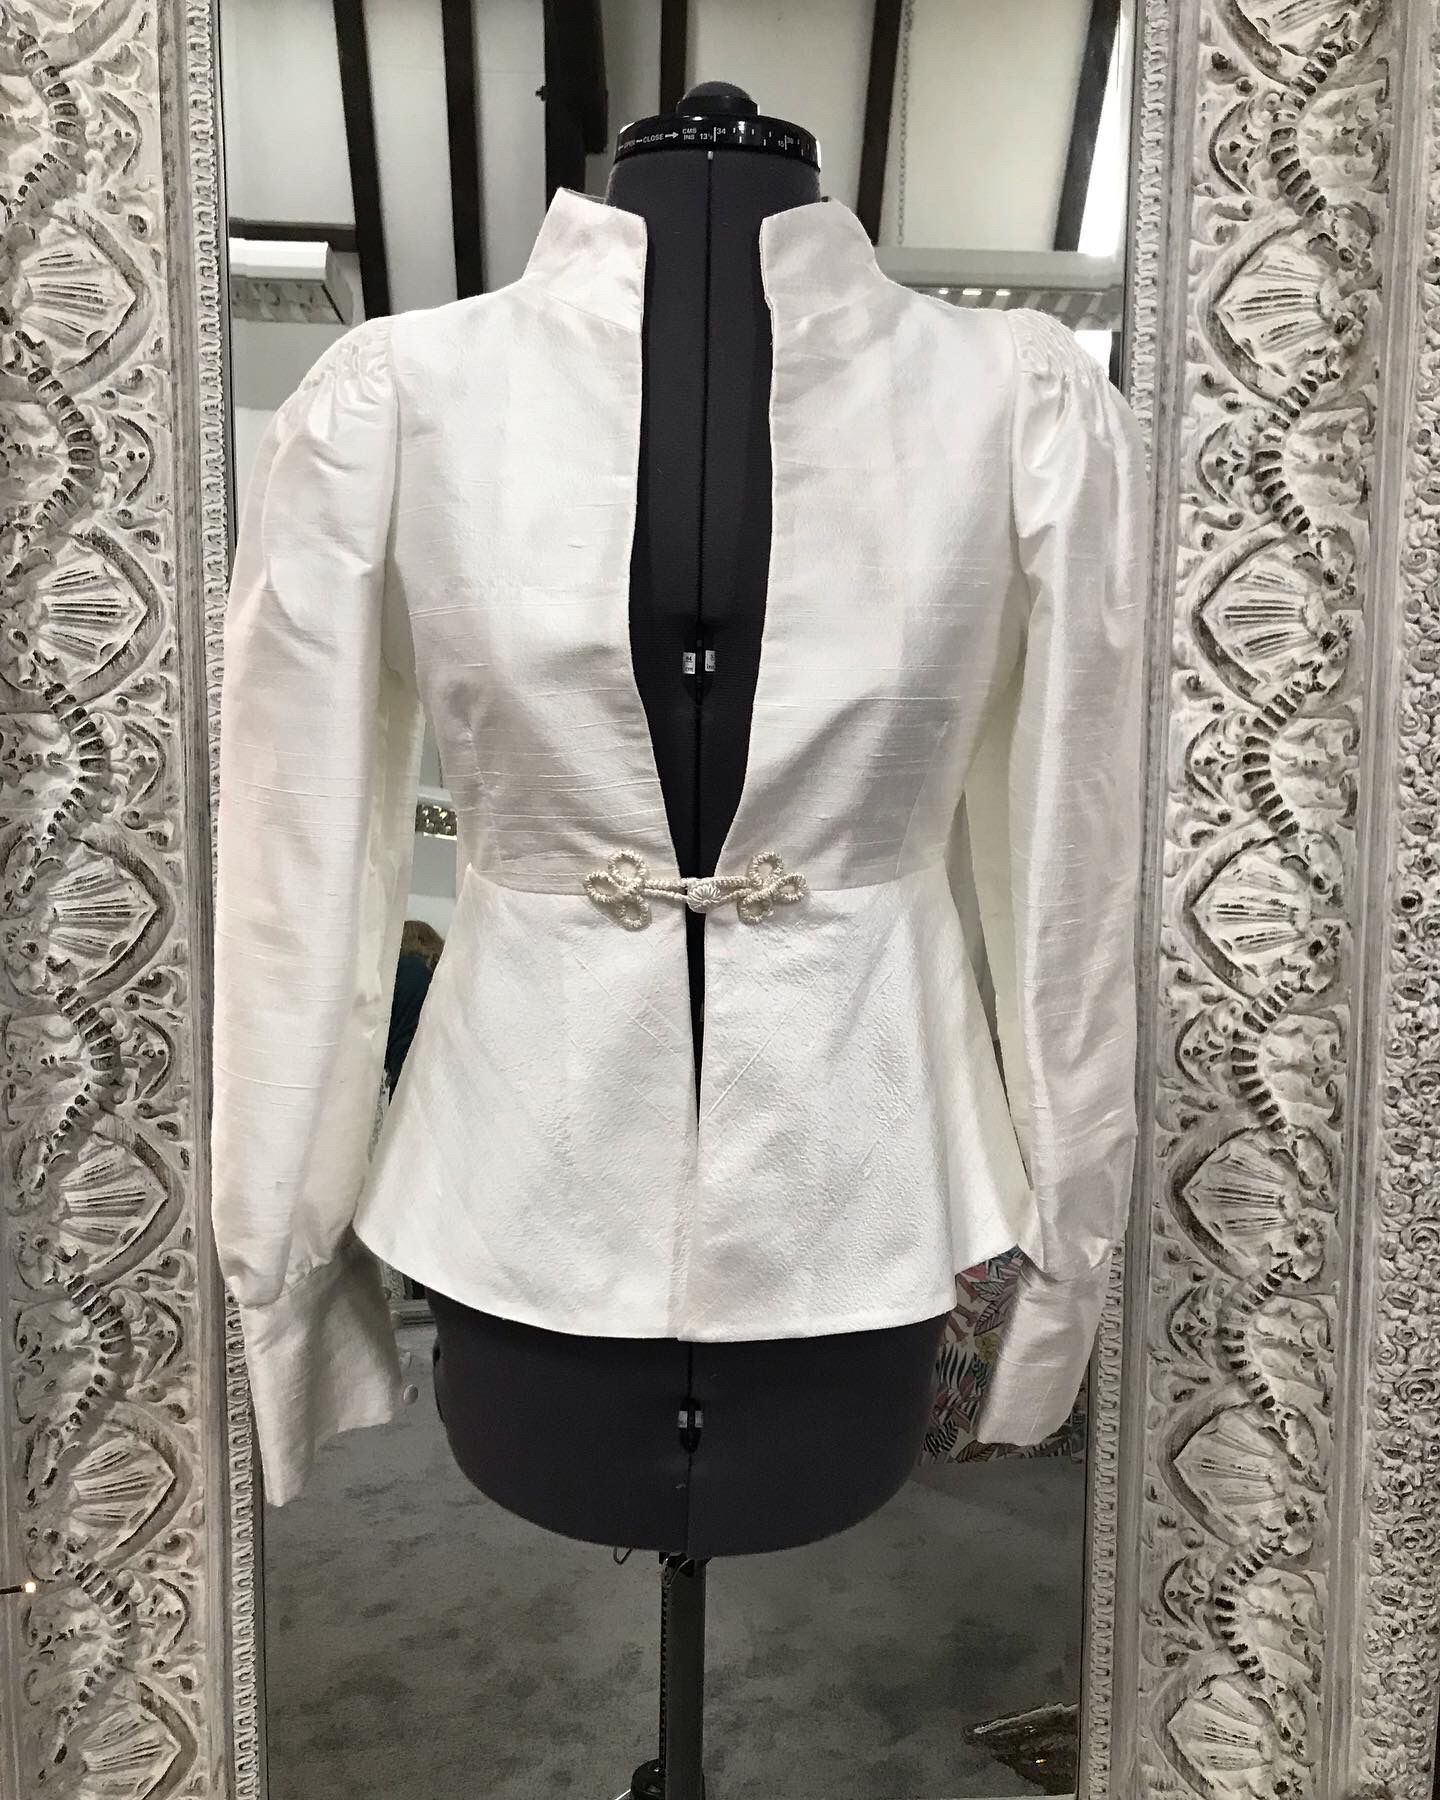 Silk bridal jacket with smocked shoulder detail for a dramatic silhouette. We added fine gold thread to the frogging closure for a subtle metallic finish.